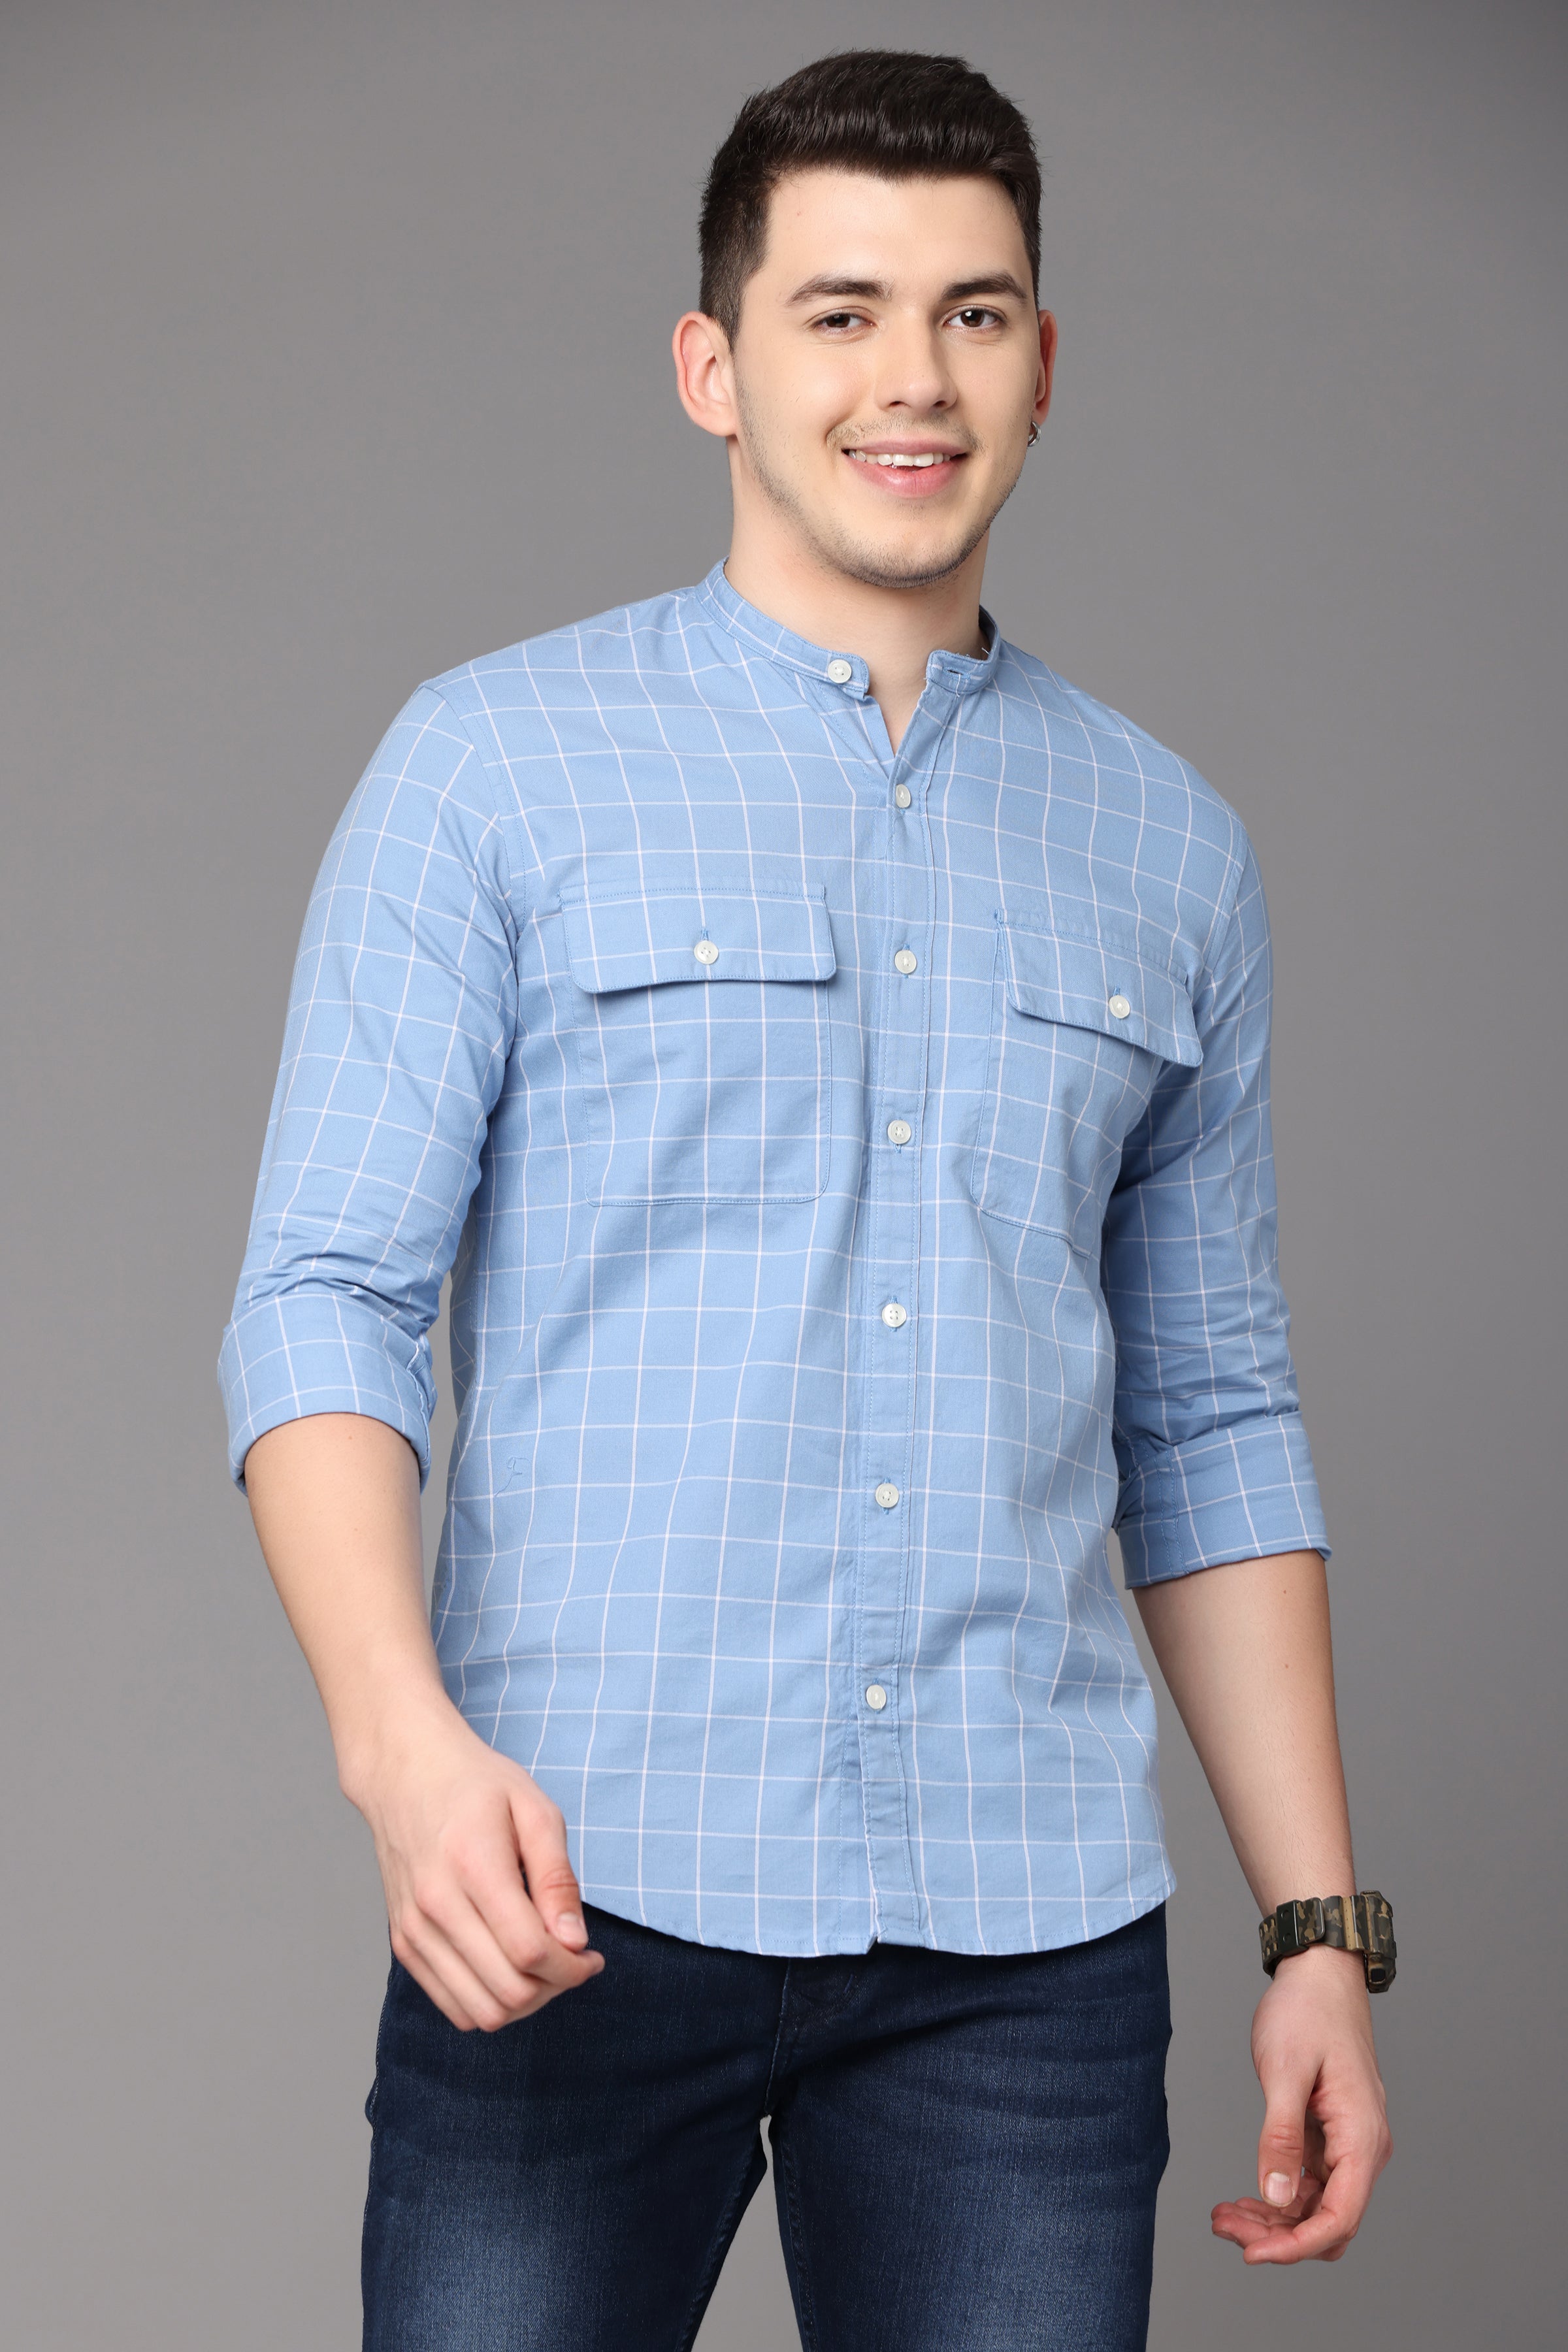 Beau Blue Check Shirt with Double Pocket Shirts Project 30 S 